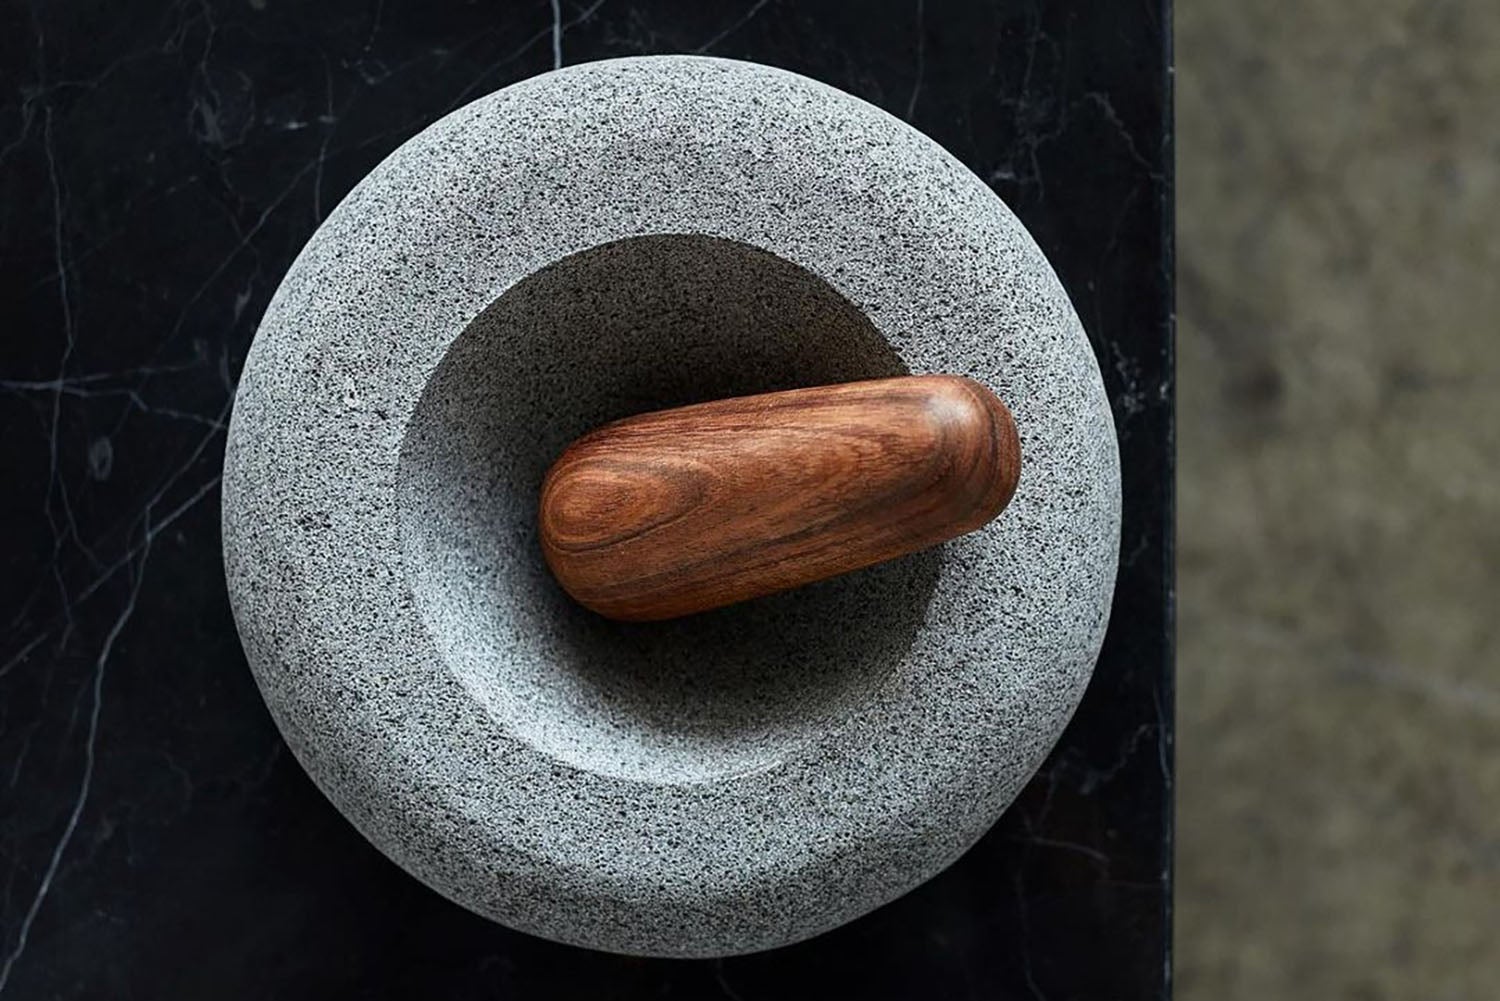 MOLCAJETE MAGIC: THE MEXICAN MORTAR AND PESTLE